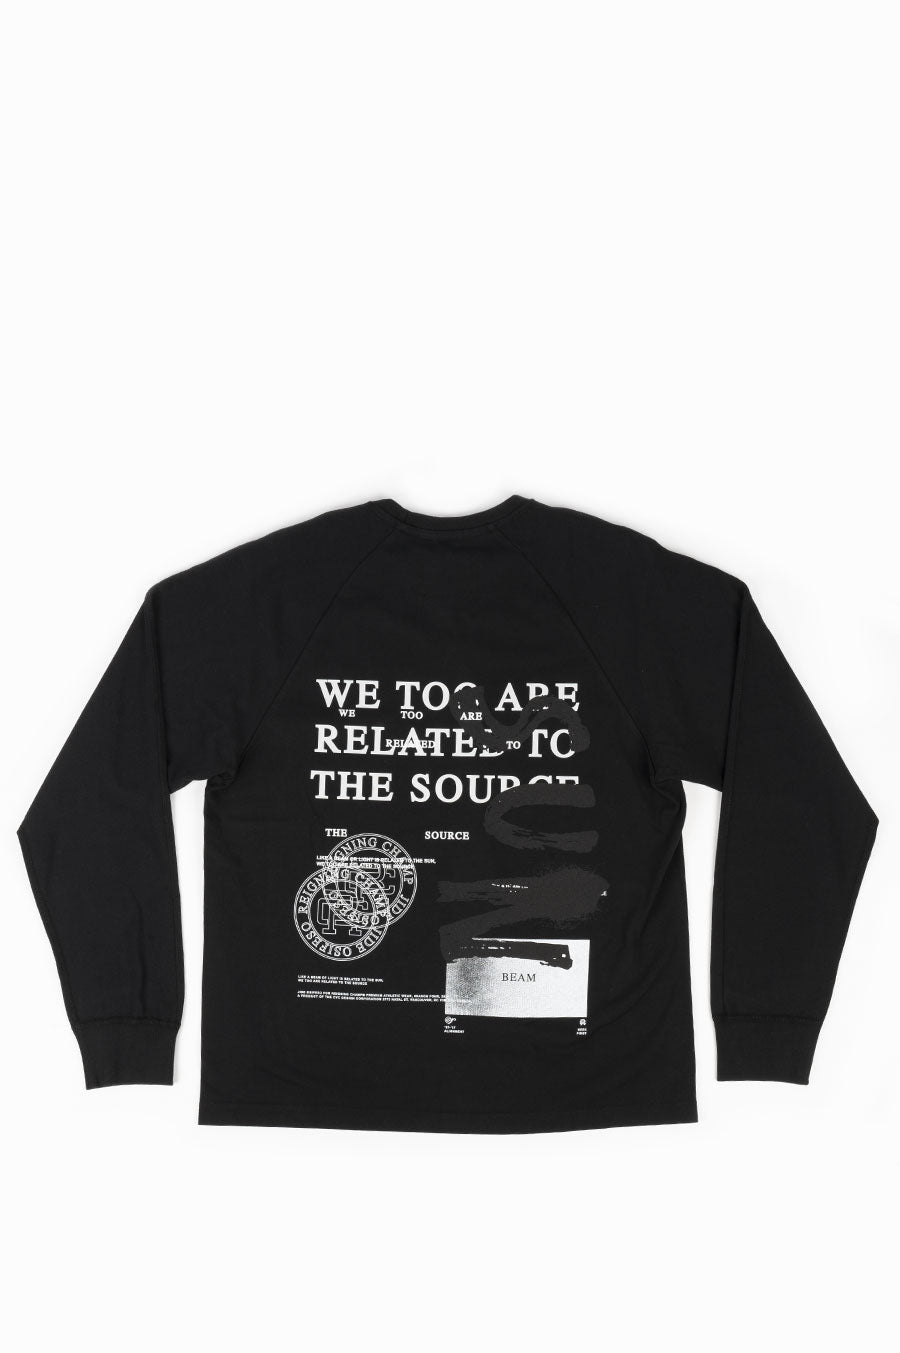 REIGNING CHAMP S04 SOURCE LONG SLEEVE BLACK